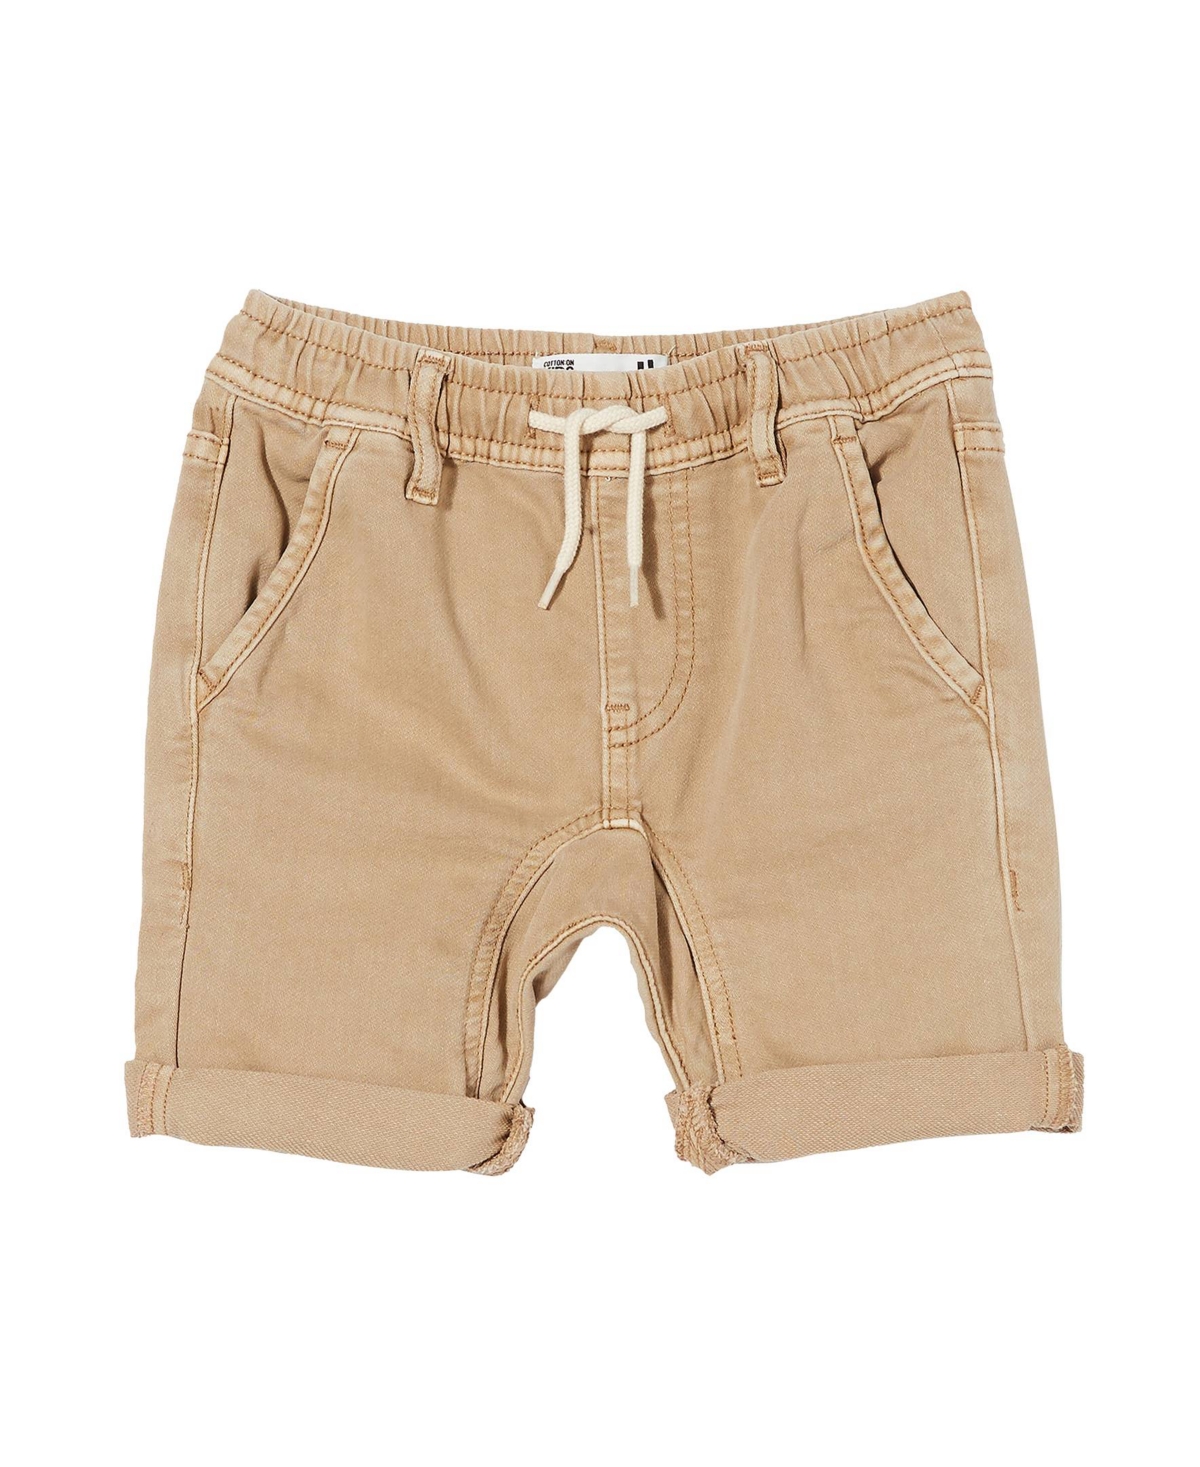 COTTON ON LITTLE BOYS SLOUCH FIT SHORTS